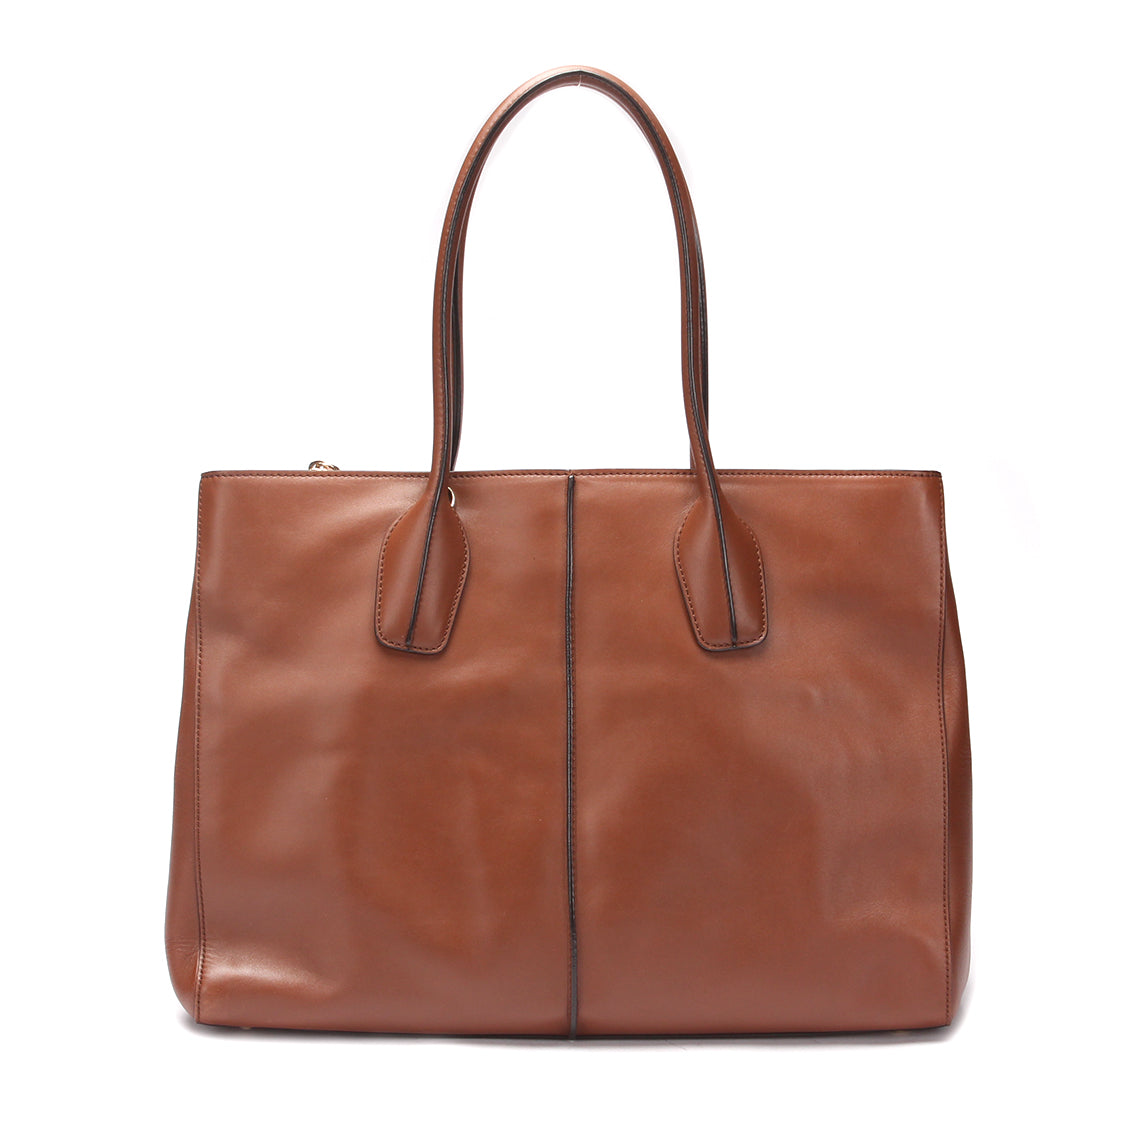 D Styling Shopper Tote